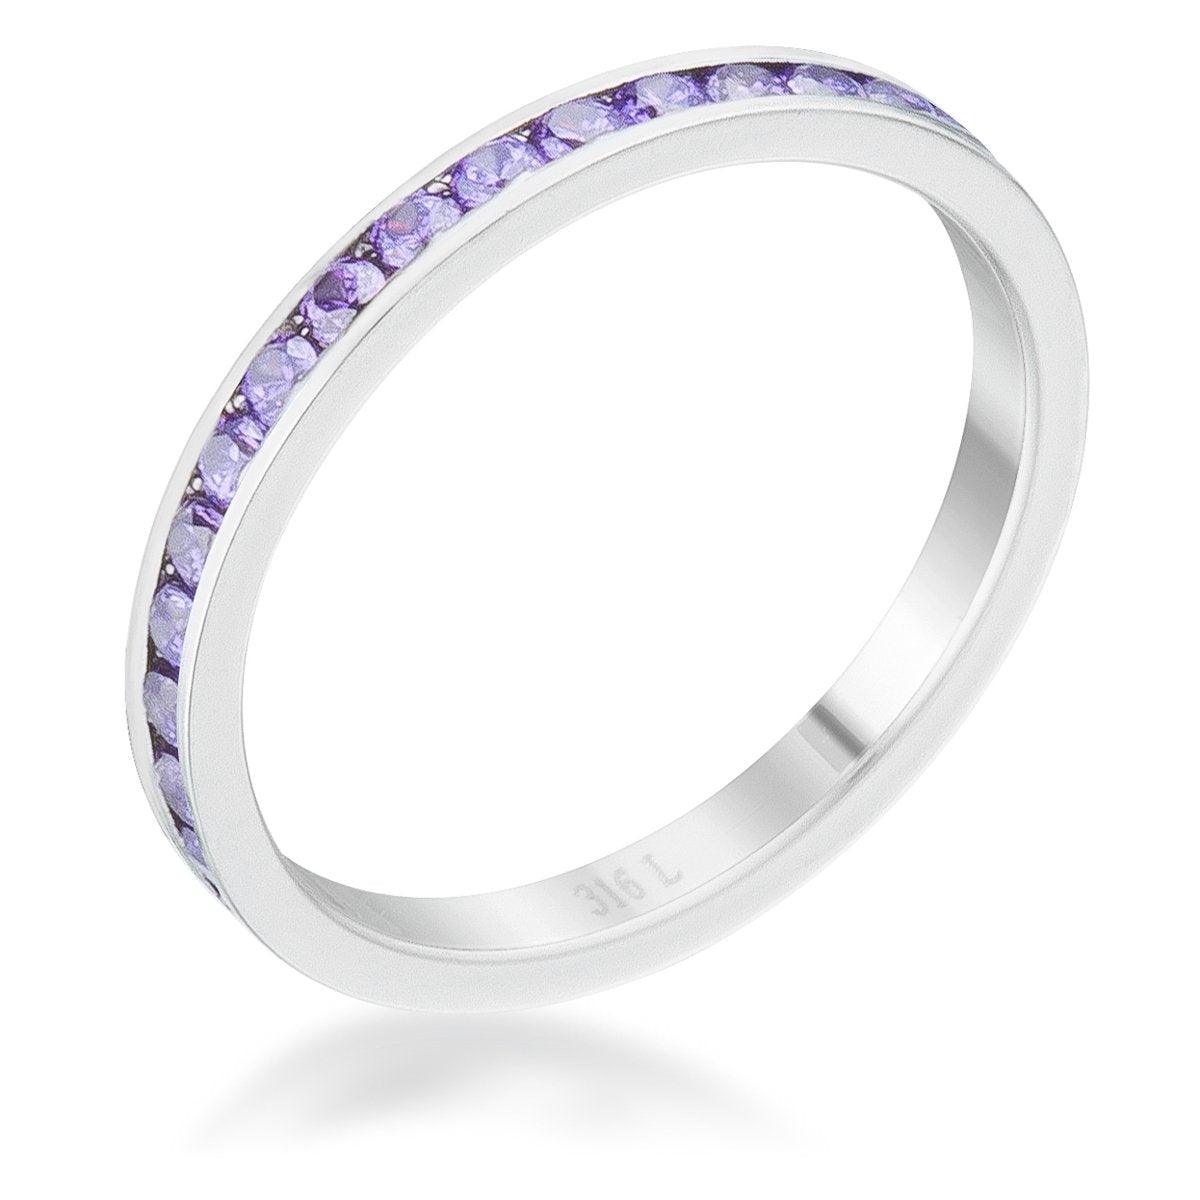 Teresa 0.5ct Amethyst CZ Stainless Steel Eternity Band freeshipping - Higher Class Elegance